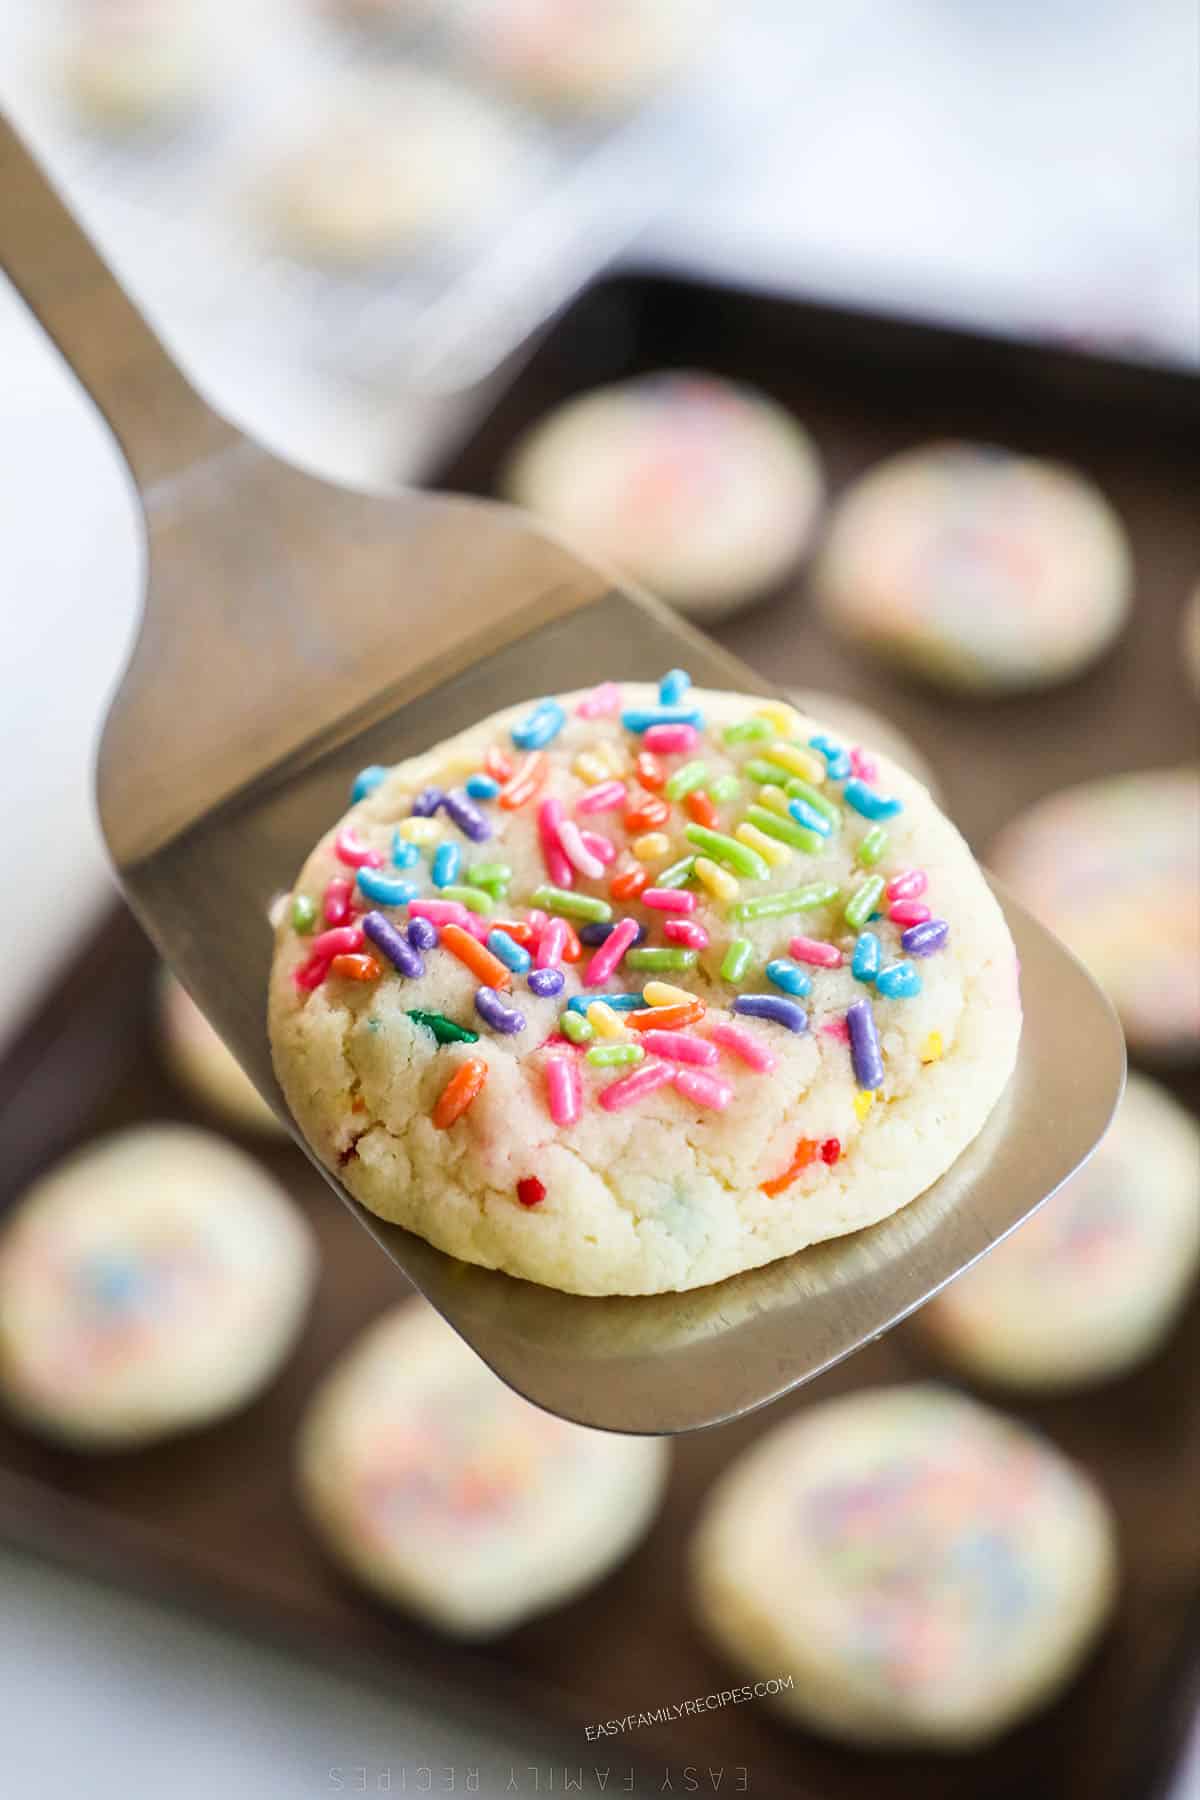 a birthday cake cookie being held on a spatula over a baking sheet filled with cookies.